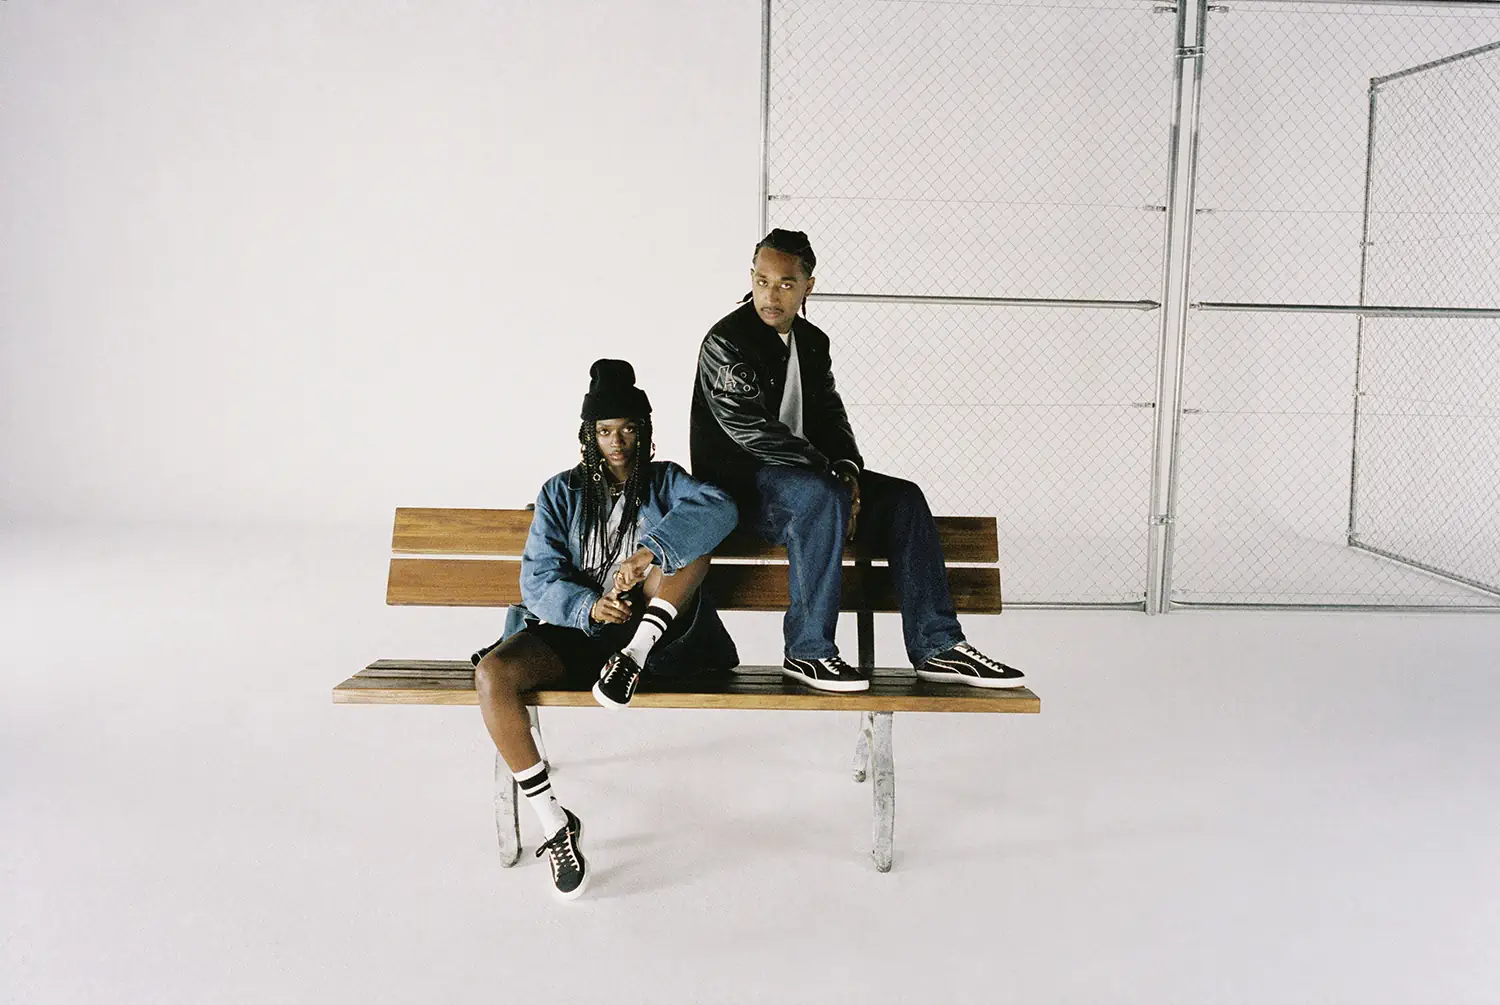 Puma Suede serenades hip hop's 50th anniversary with style